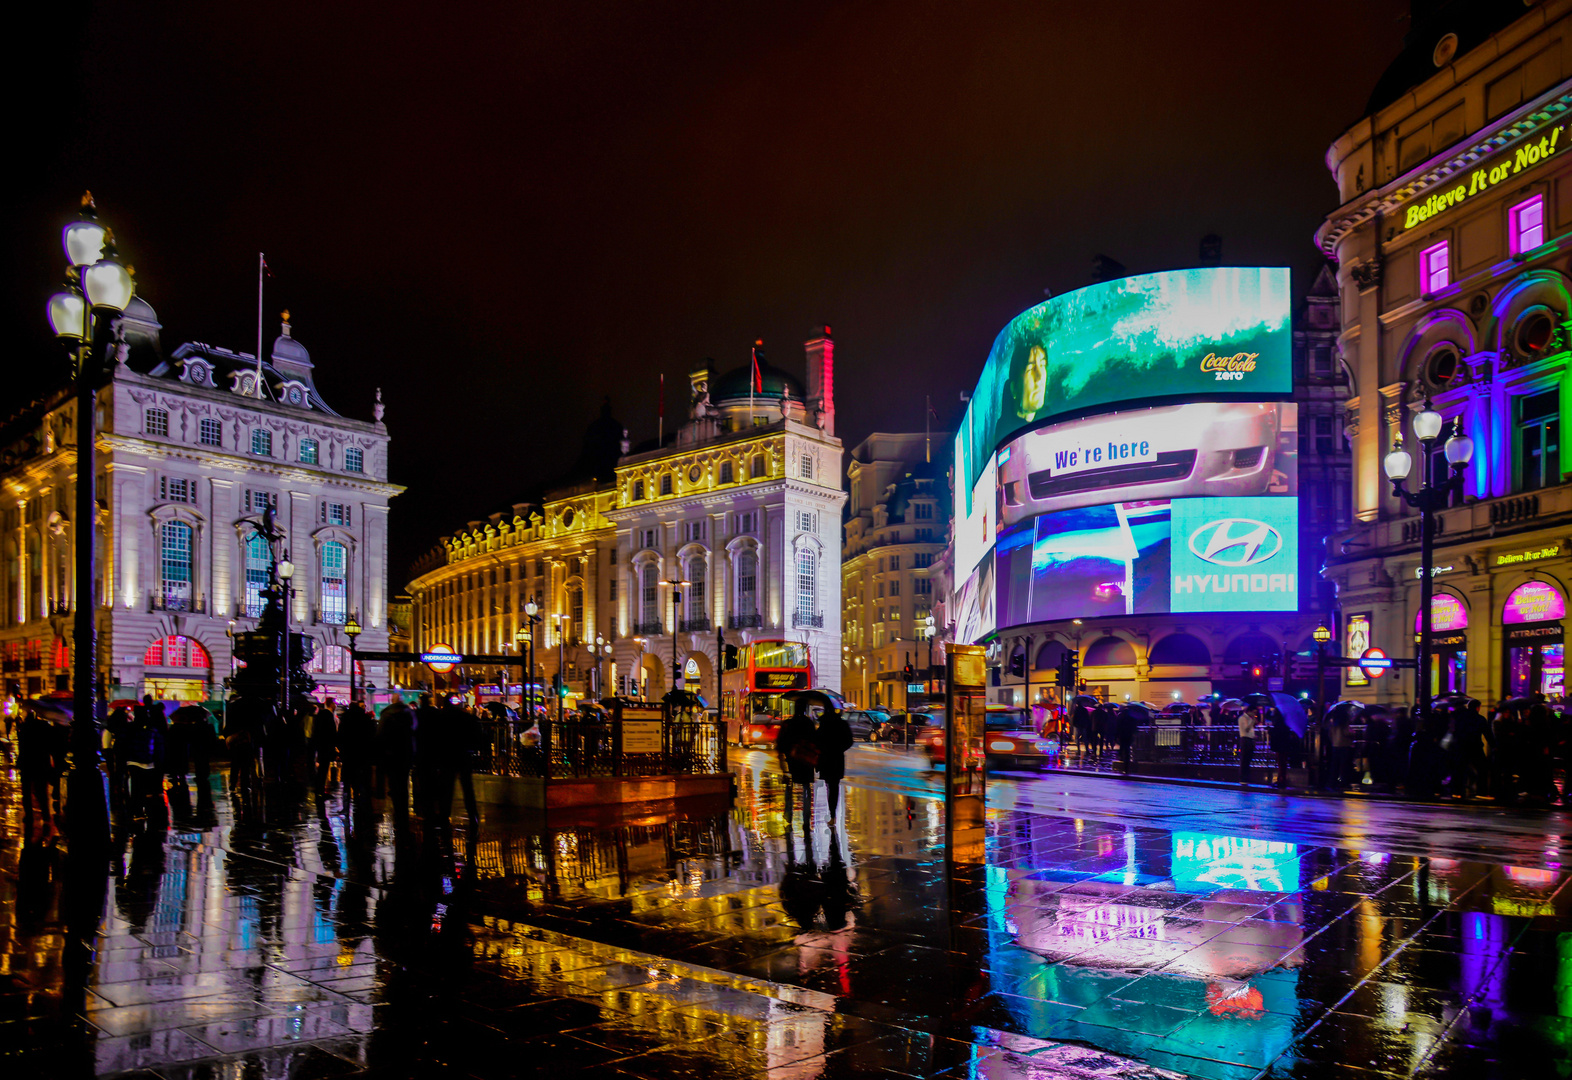 London, Piccadilly Circus